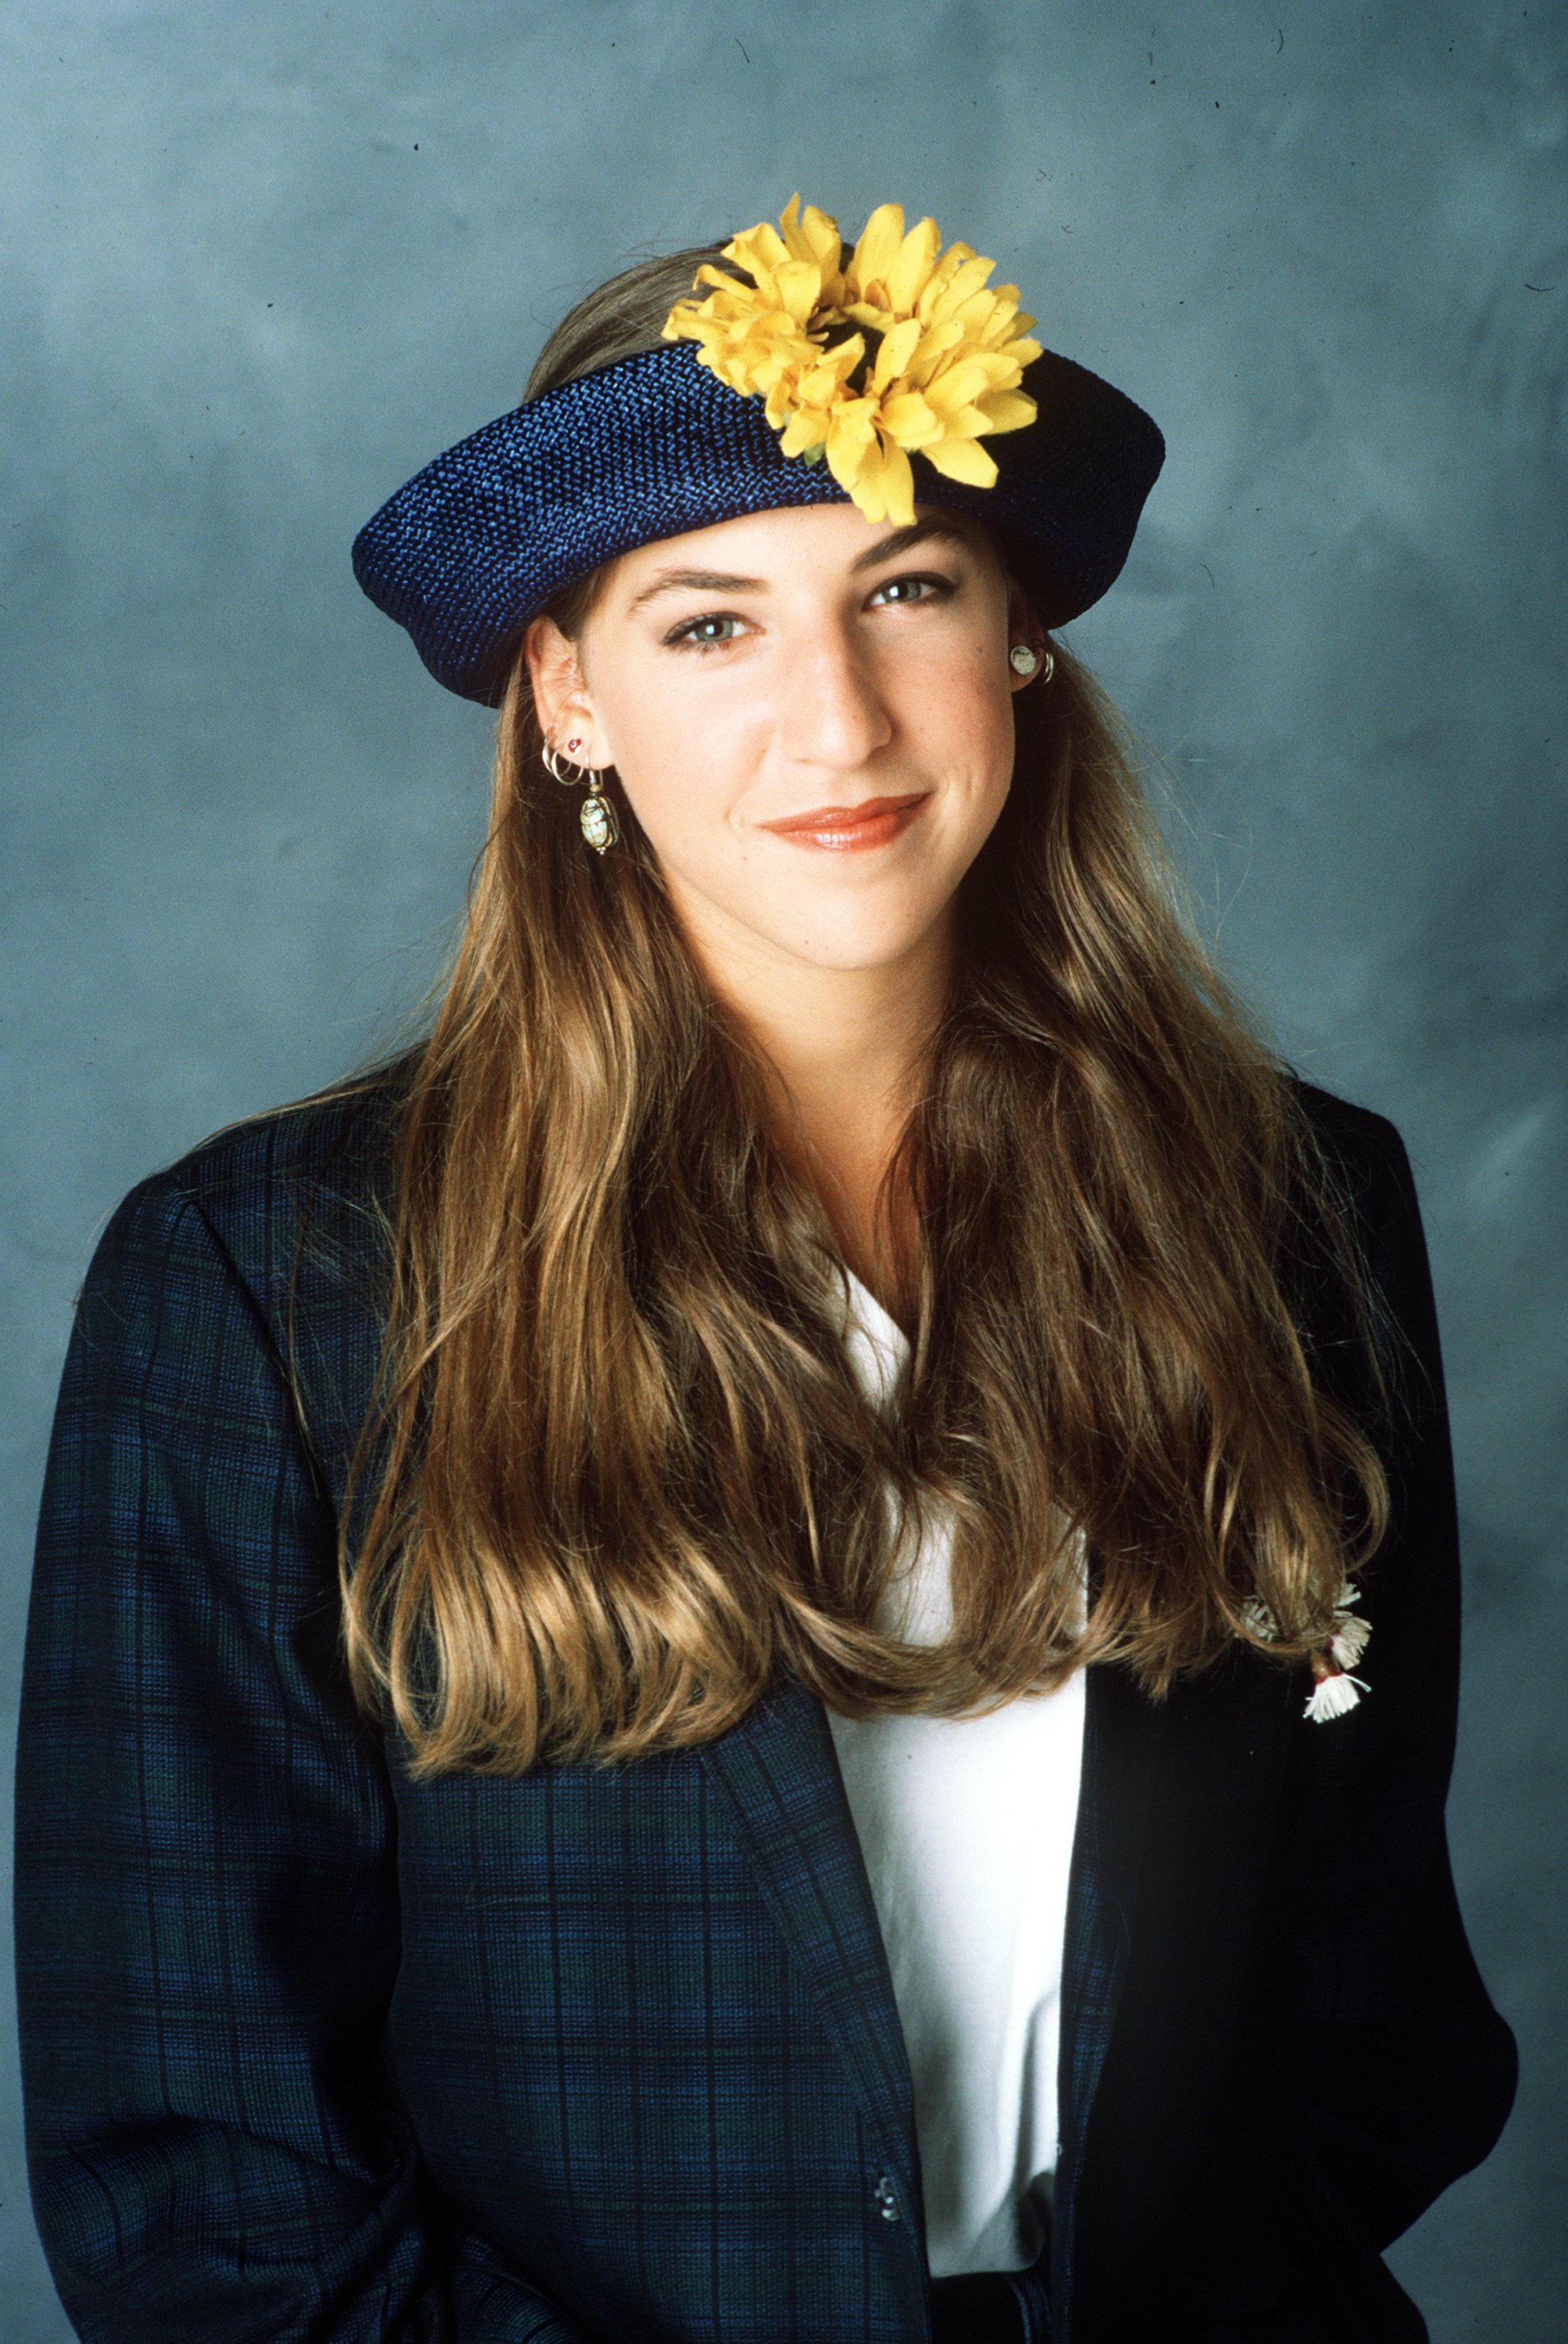 Mayim Bialik photographed for the TV shoe Blossom in 1992. | Source: Getty Images